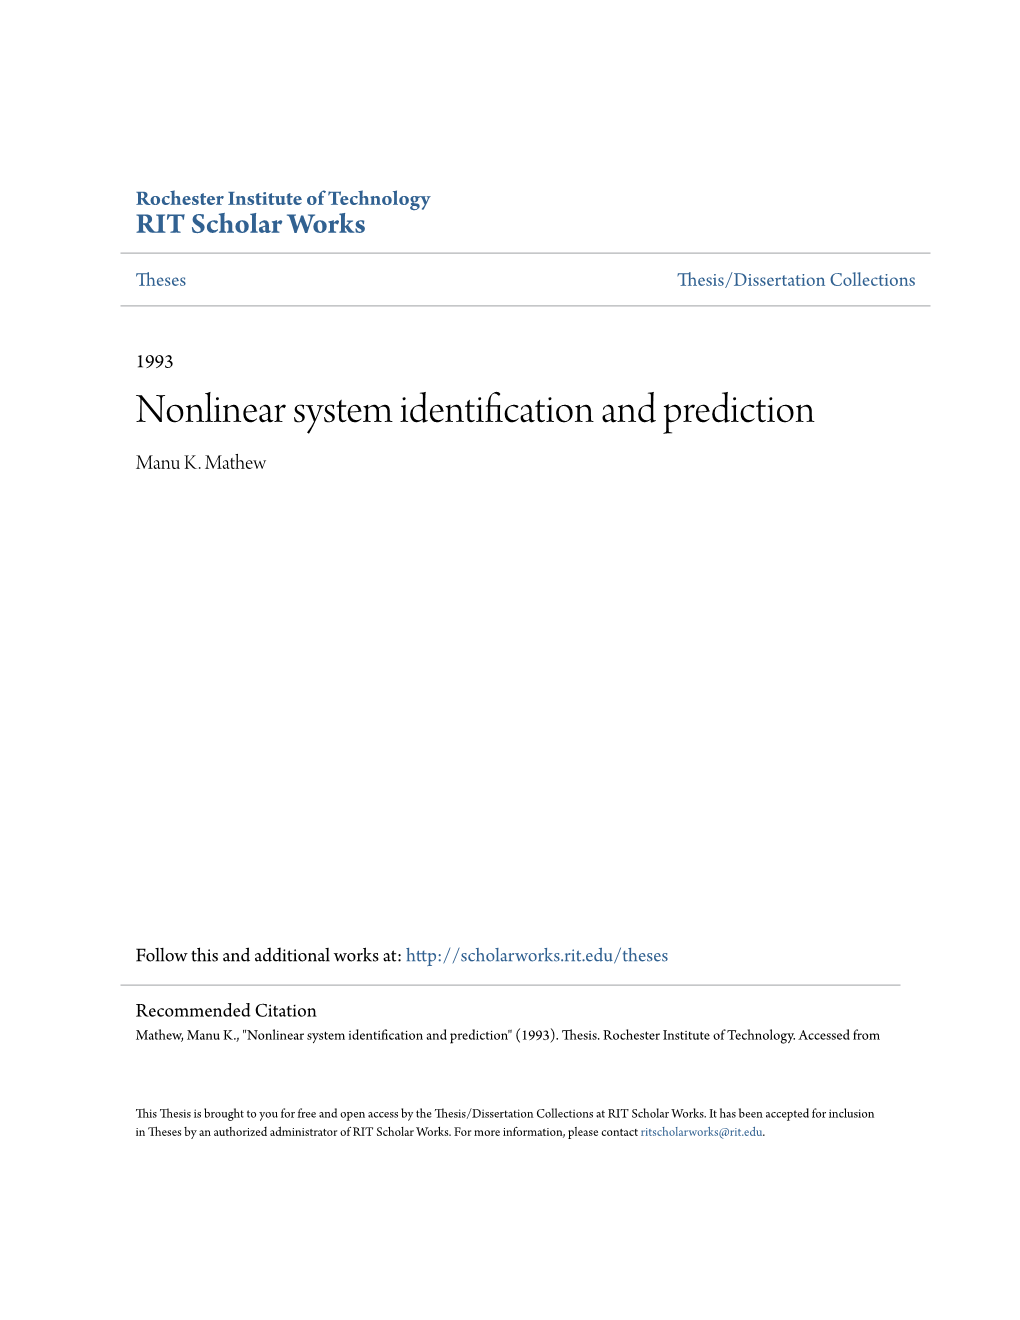 Nonlinear System Identification and Prediction Manu K